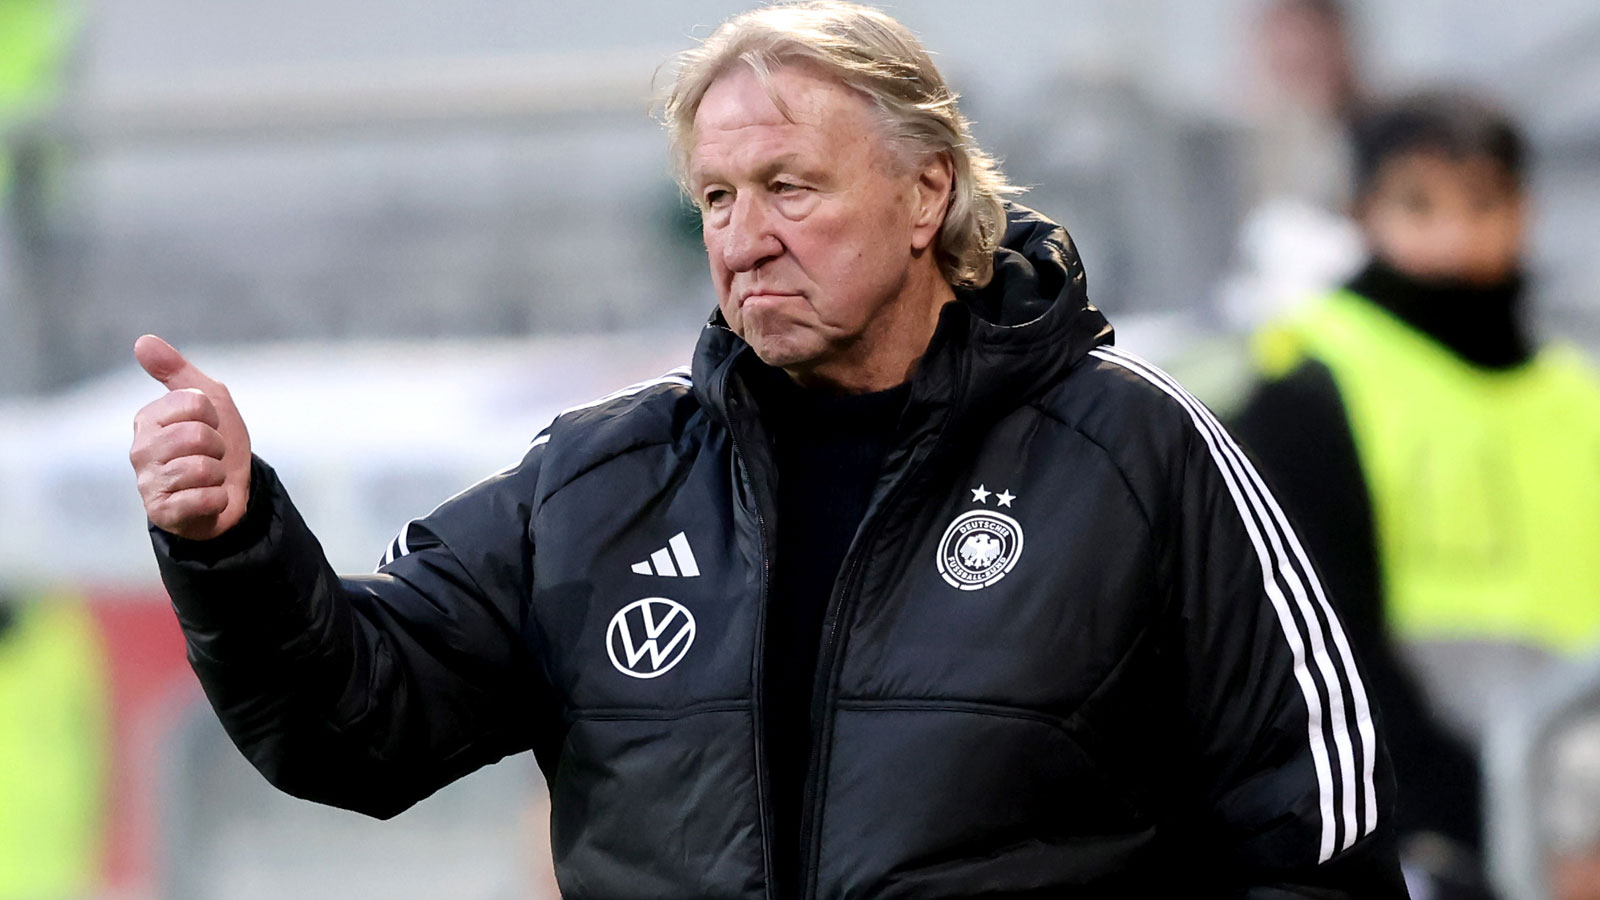 Horst Hrubesch forces a objective combat for the DFB